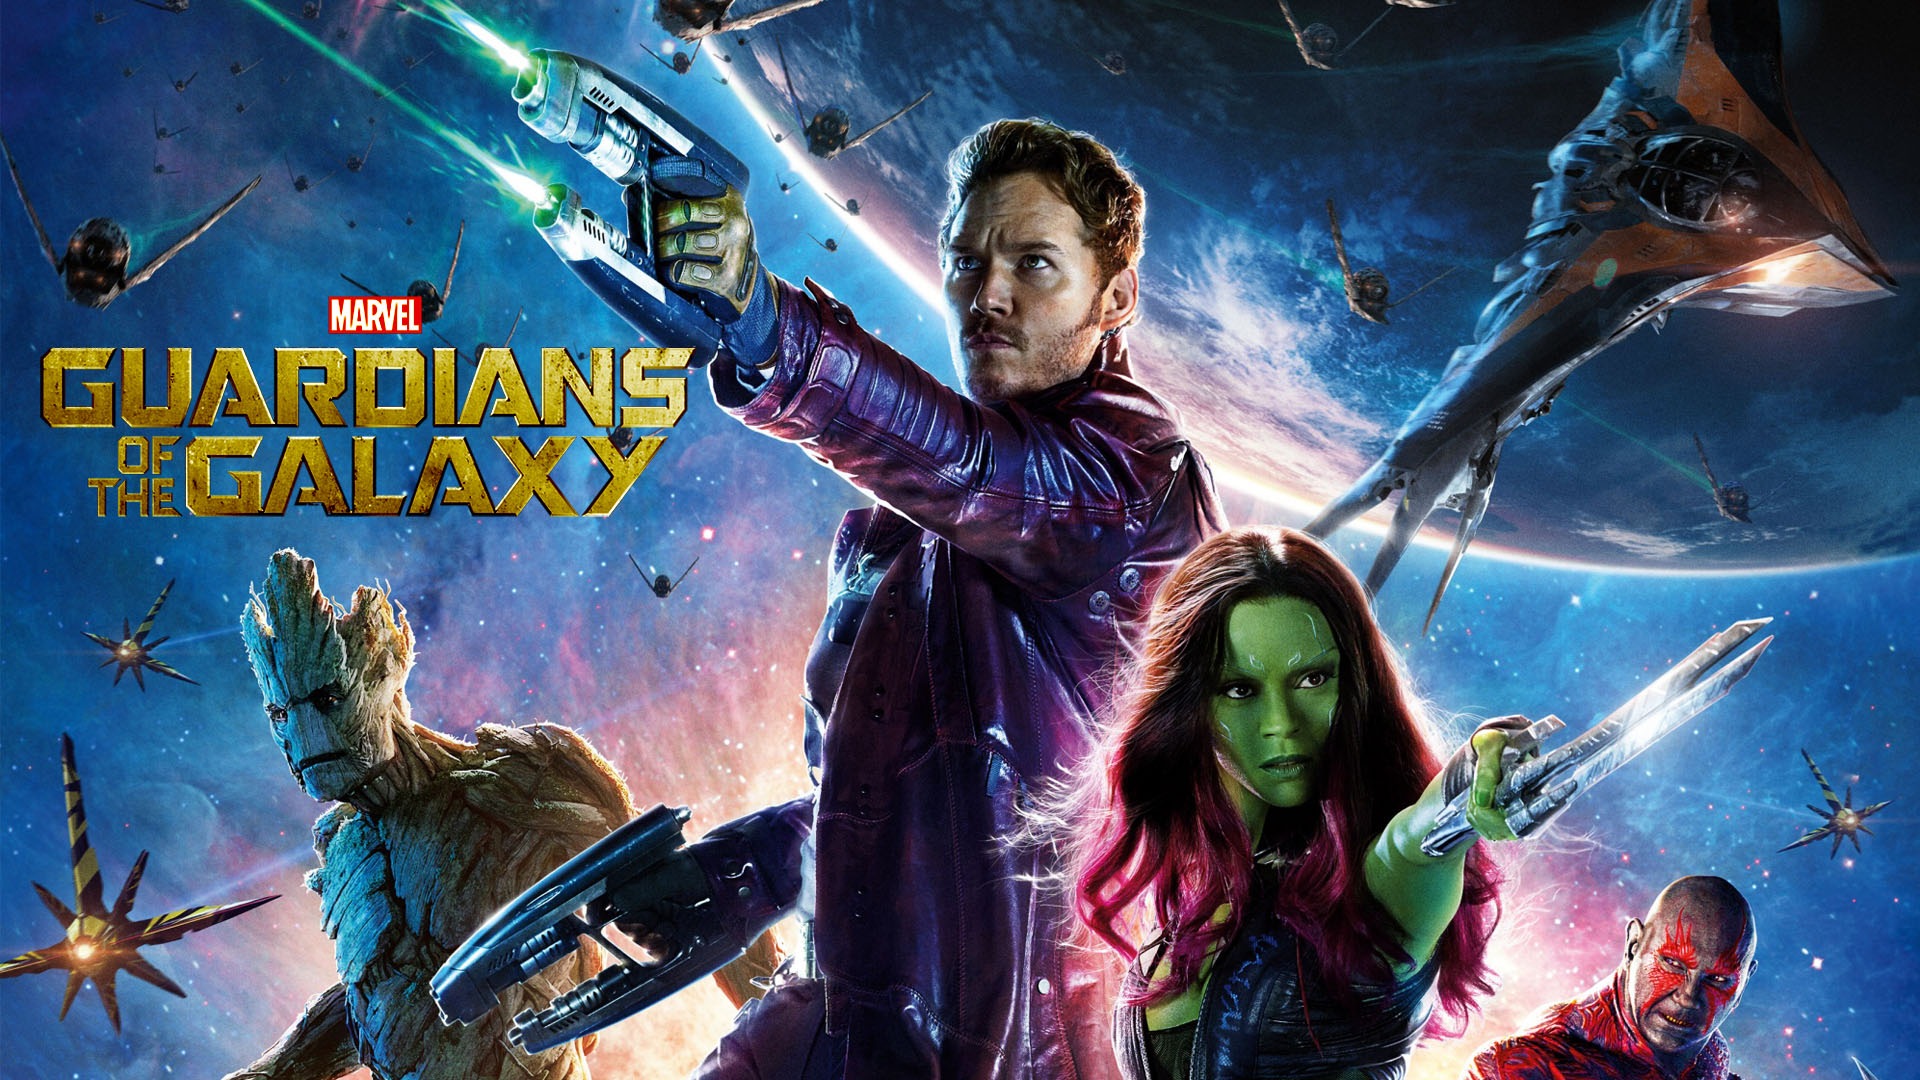 Guardians of the Galaxy 2014 HD movie wallpapers #15 - 1920x1080